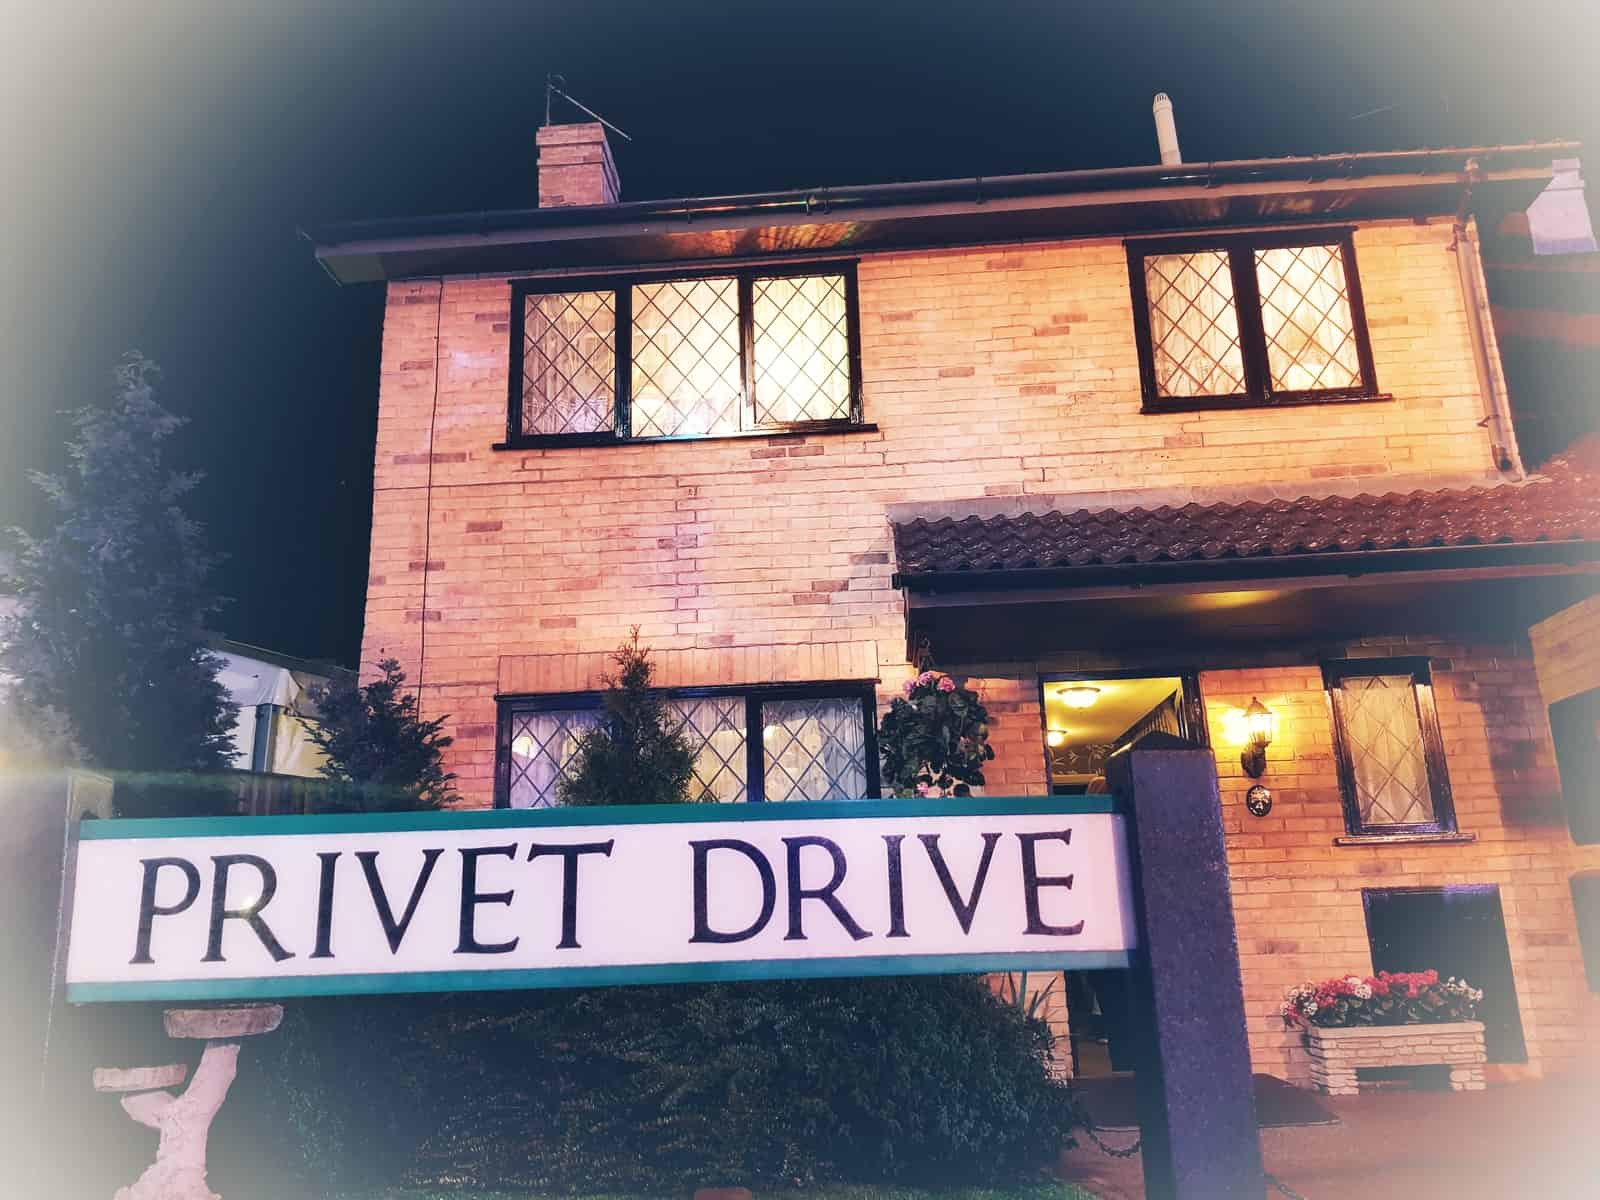 The outside of 1 Privet drive with the Privet Drive sign in the foreground